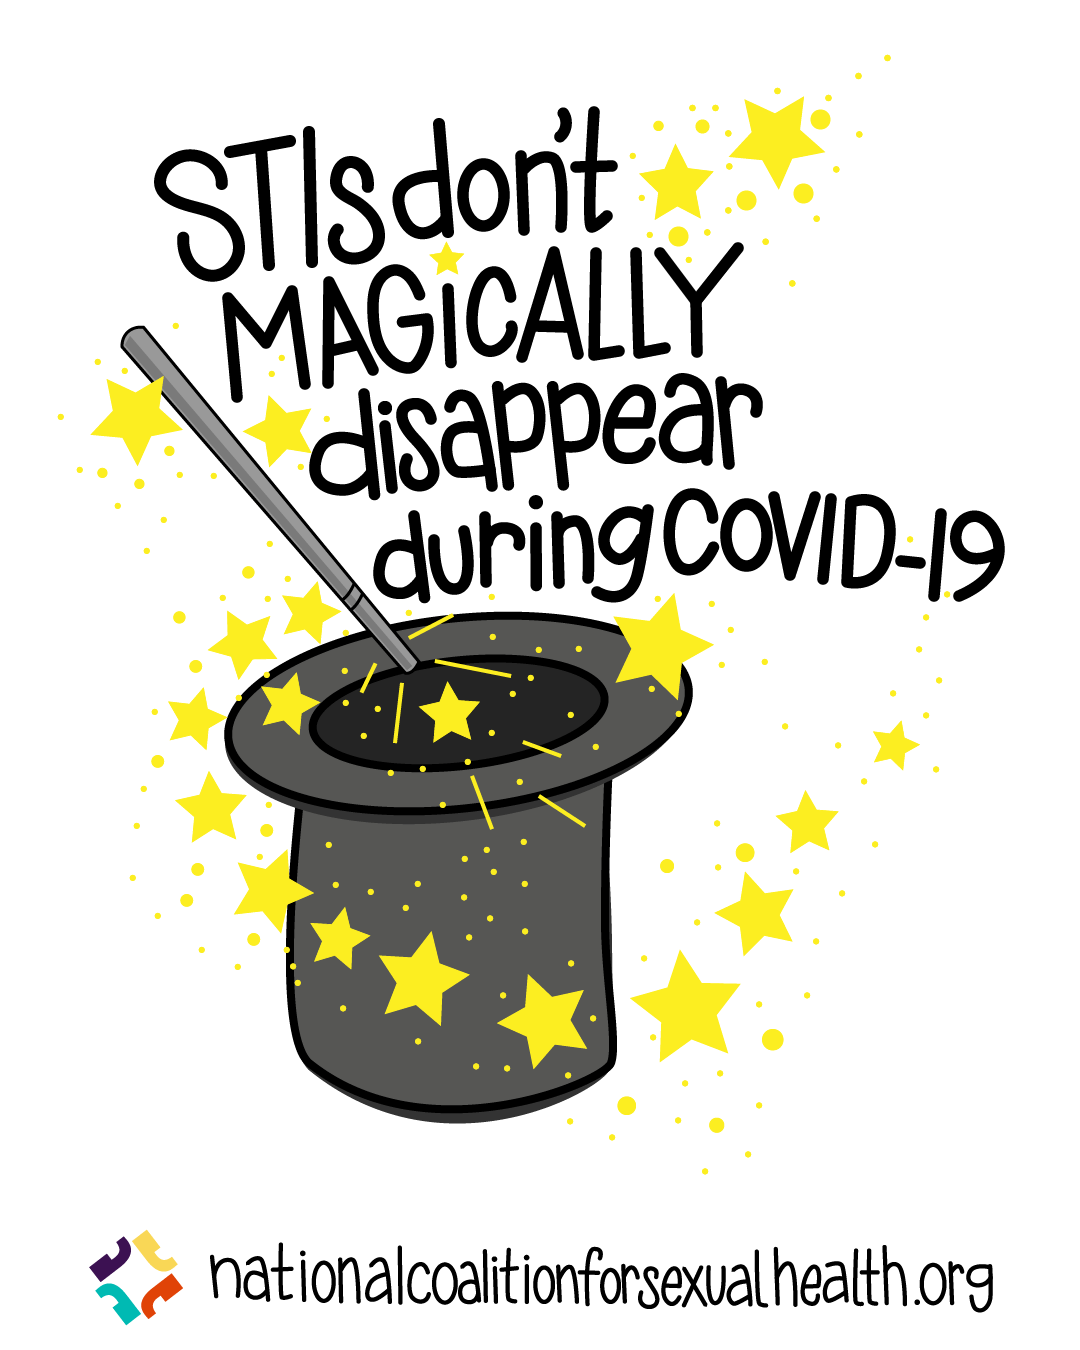 STIs don't magically disappear during COVID-19